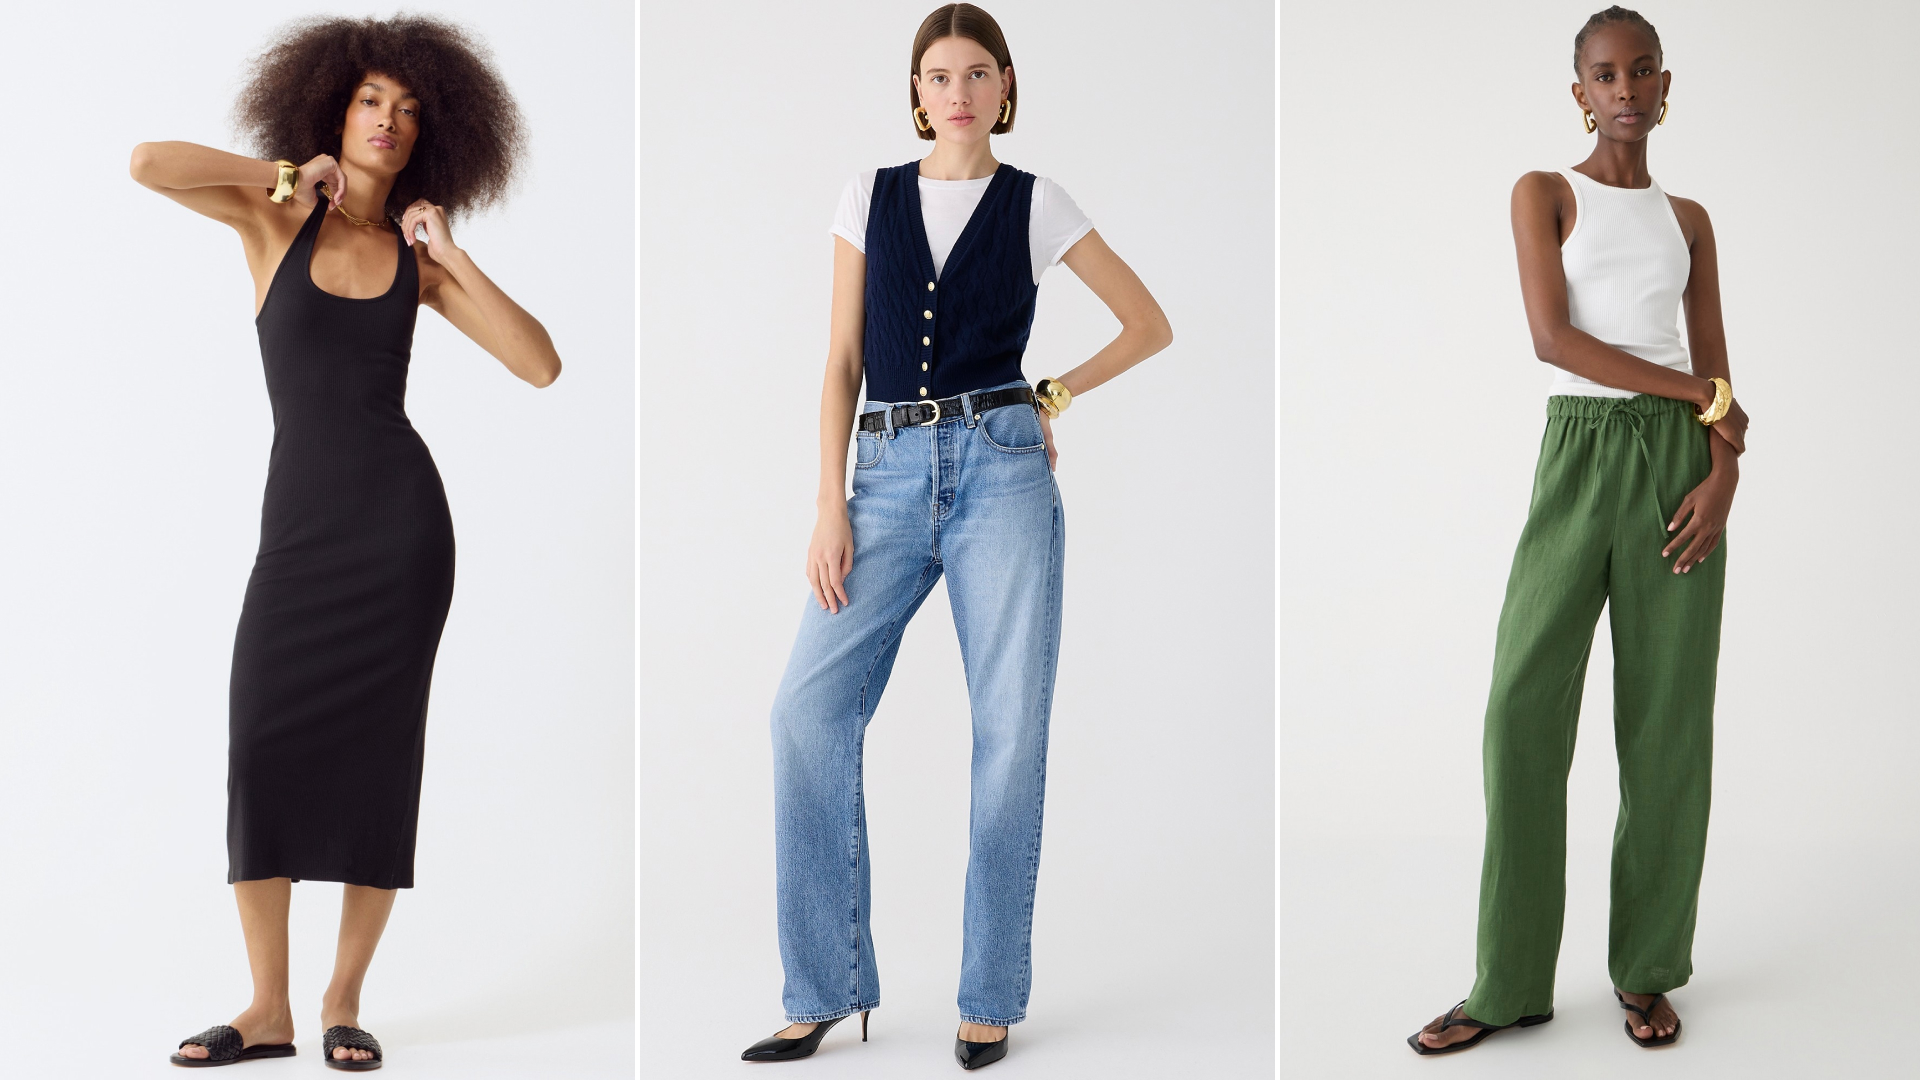 J.Crew Launches a Timeless Collection for Early Spring